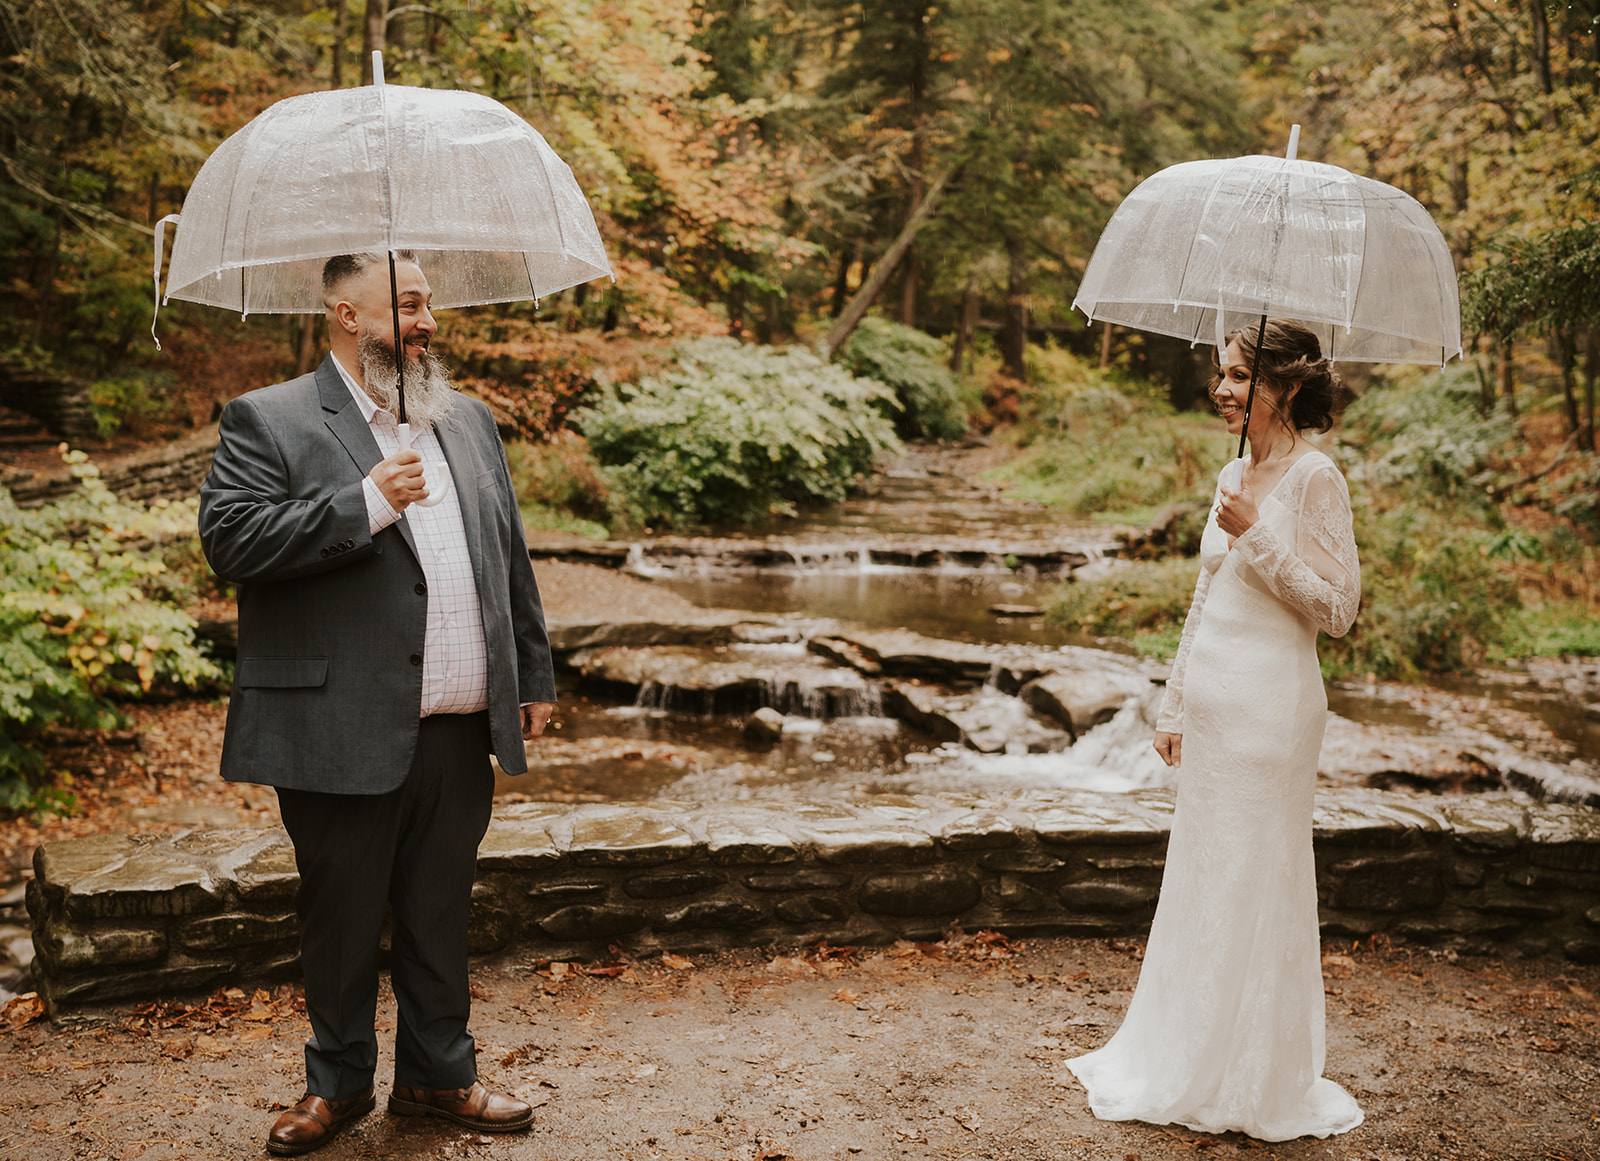 vow renewal at letchworth state park in upstate ny